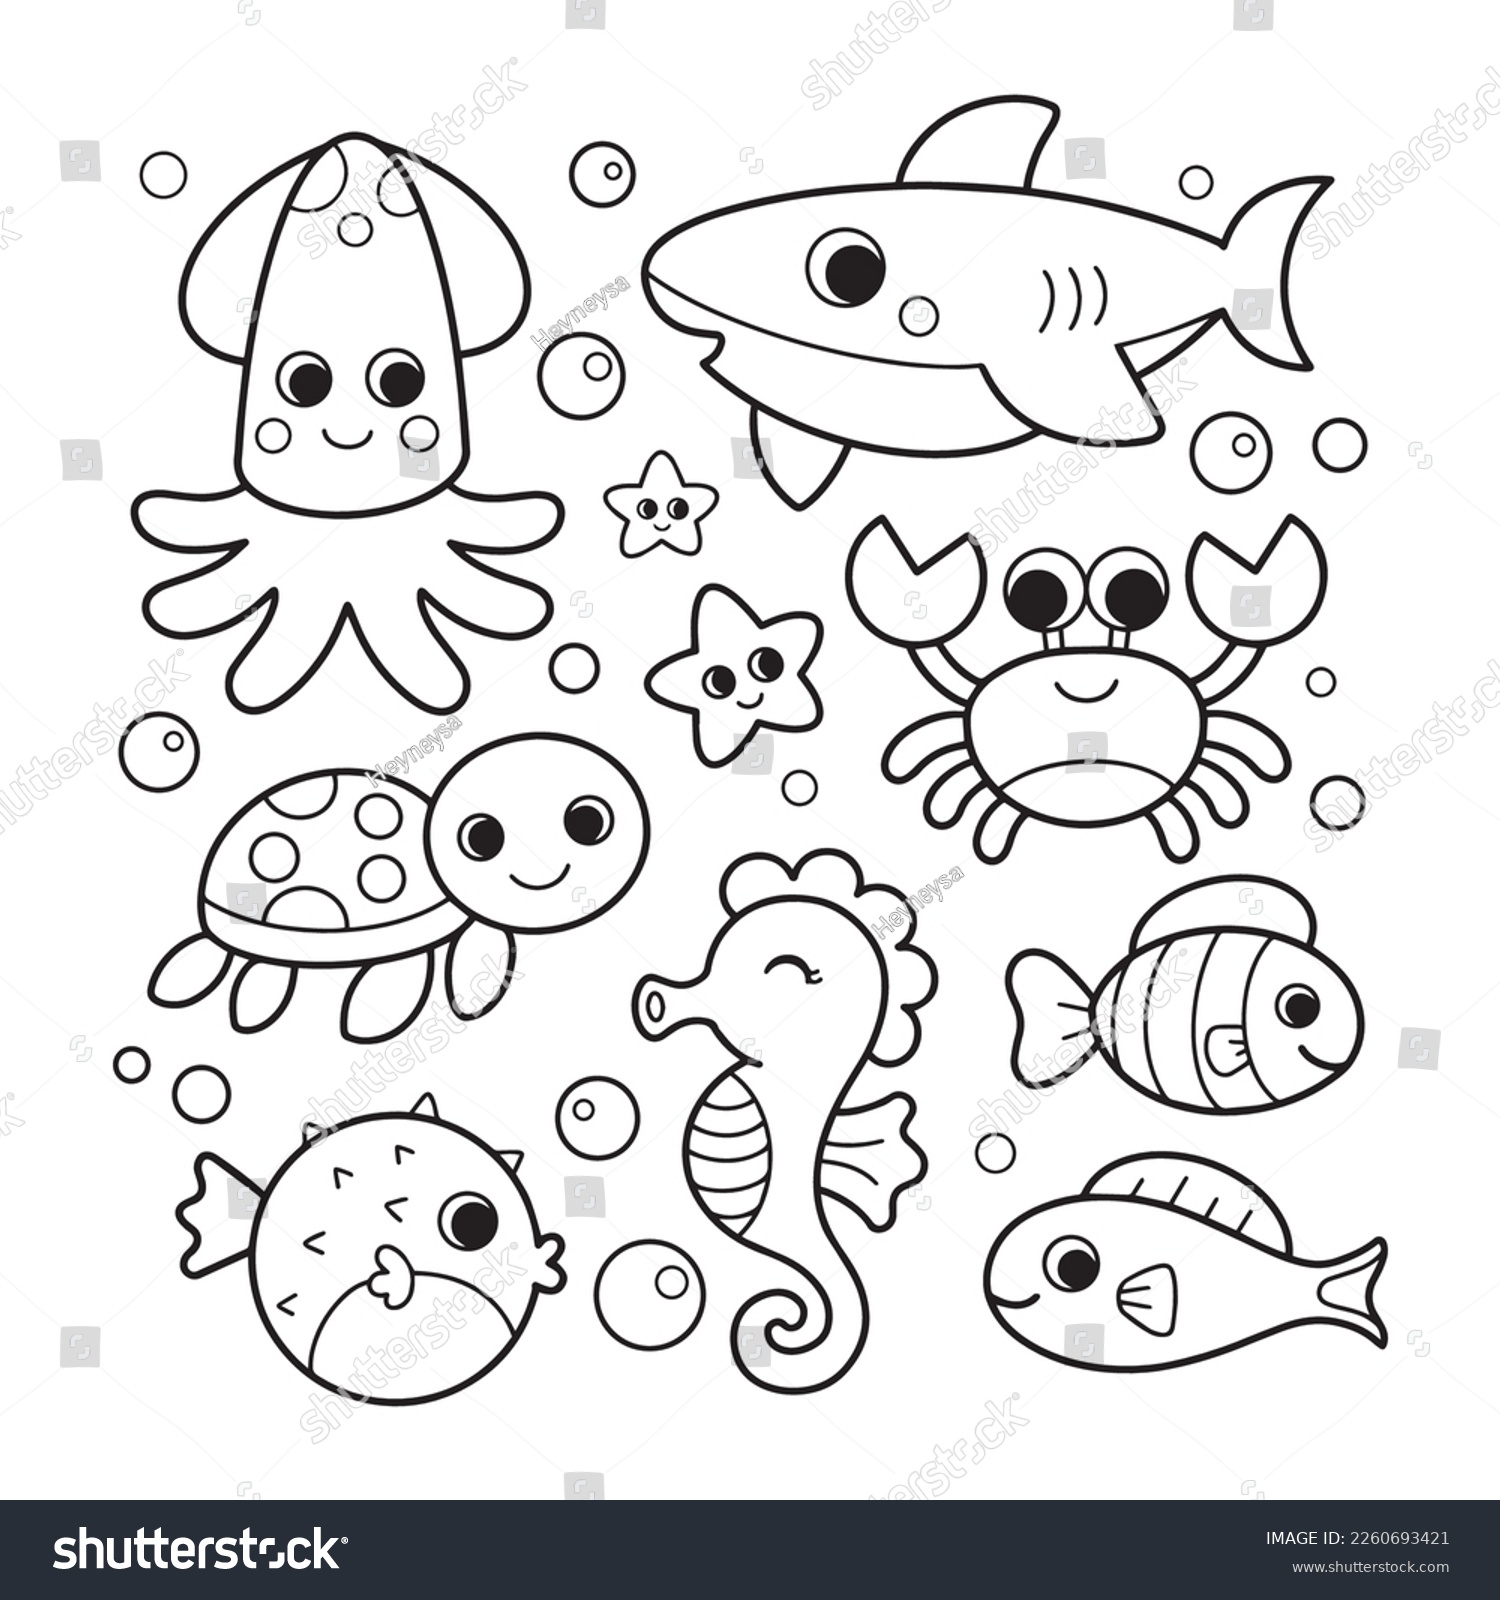 Ocean animals coloring pages kids stock vector royalty free